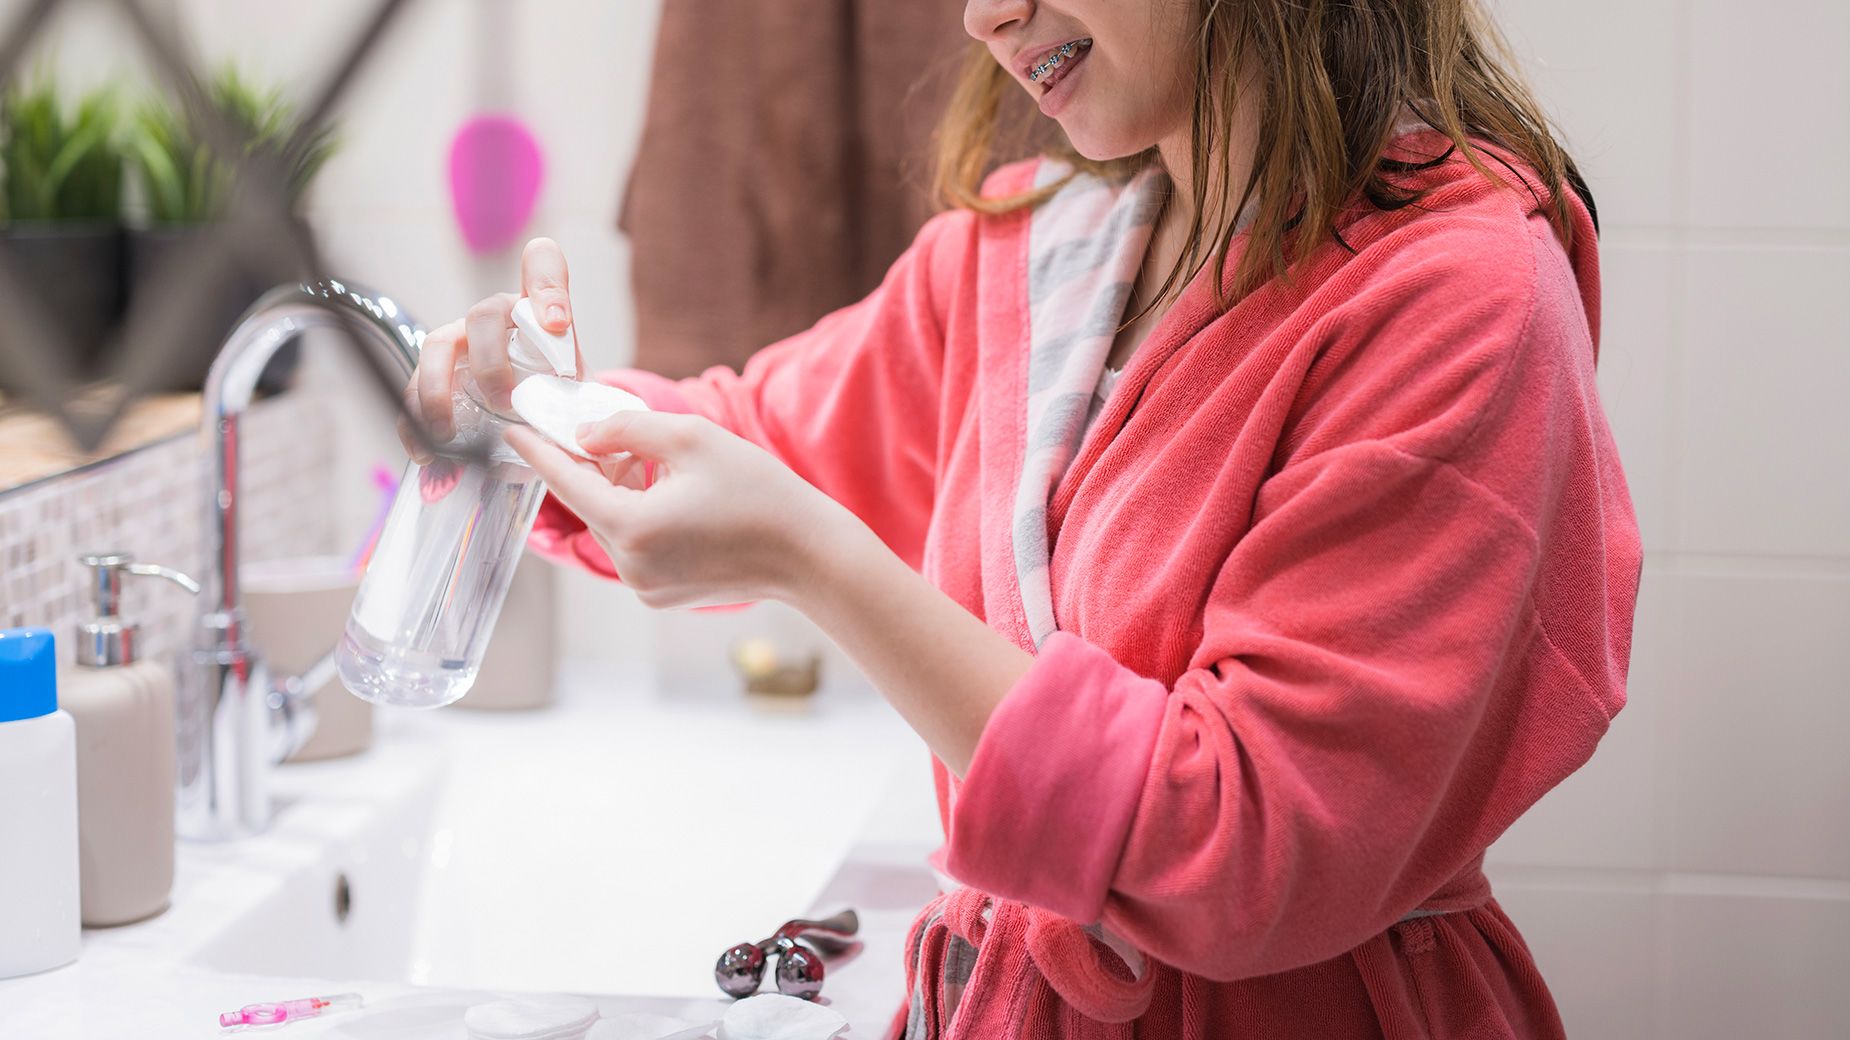 Tweens often find skin care products on social media when influencers rave about them.